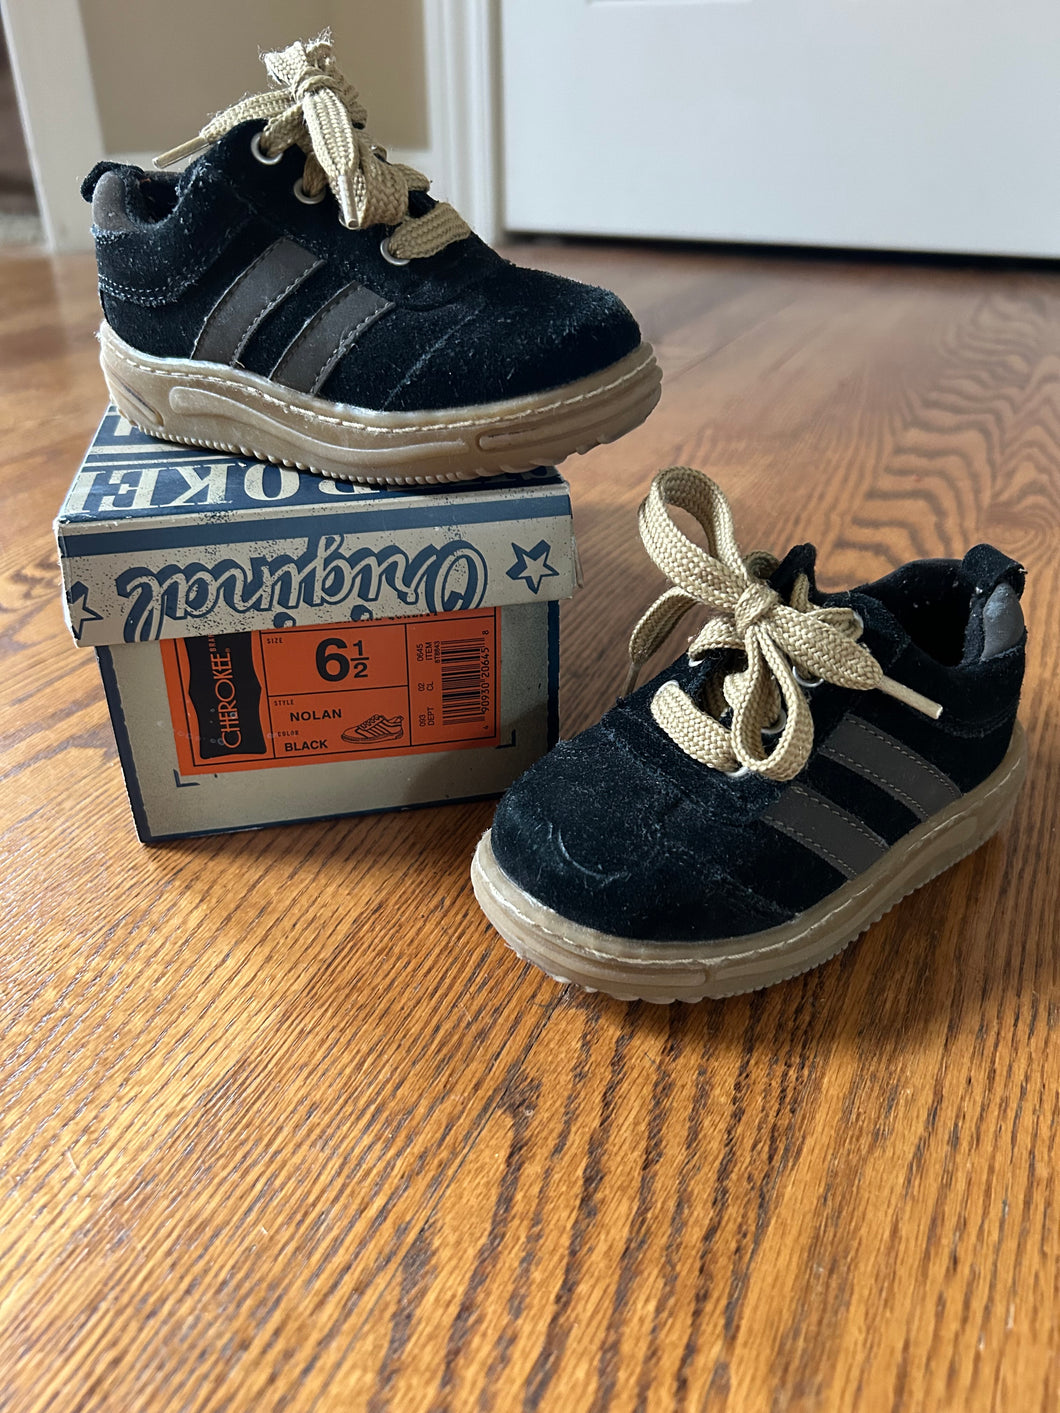 Cherokee - Size Toddler 6.5 shoes - Like new! Black, striped preppy shoe 6.5